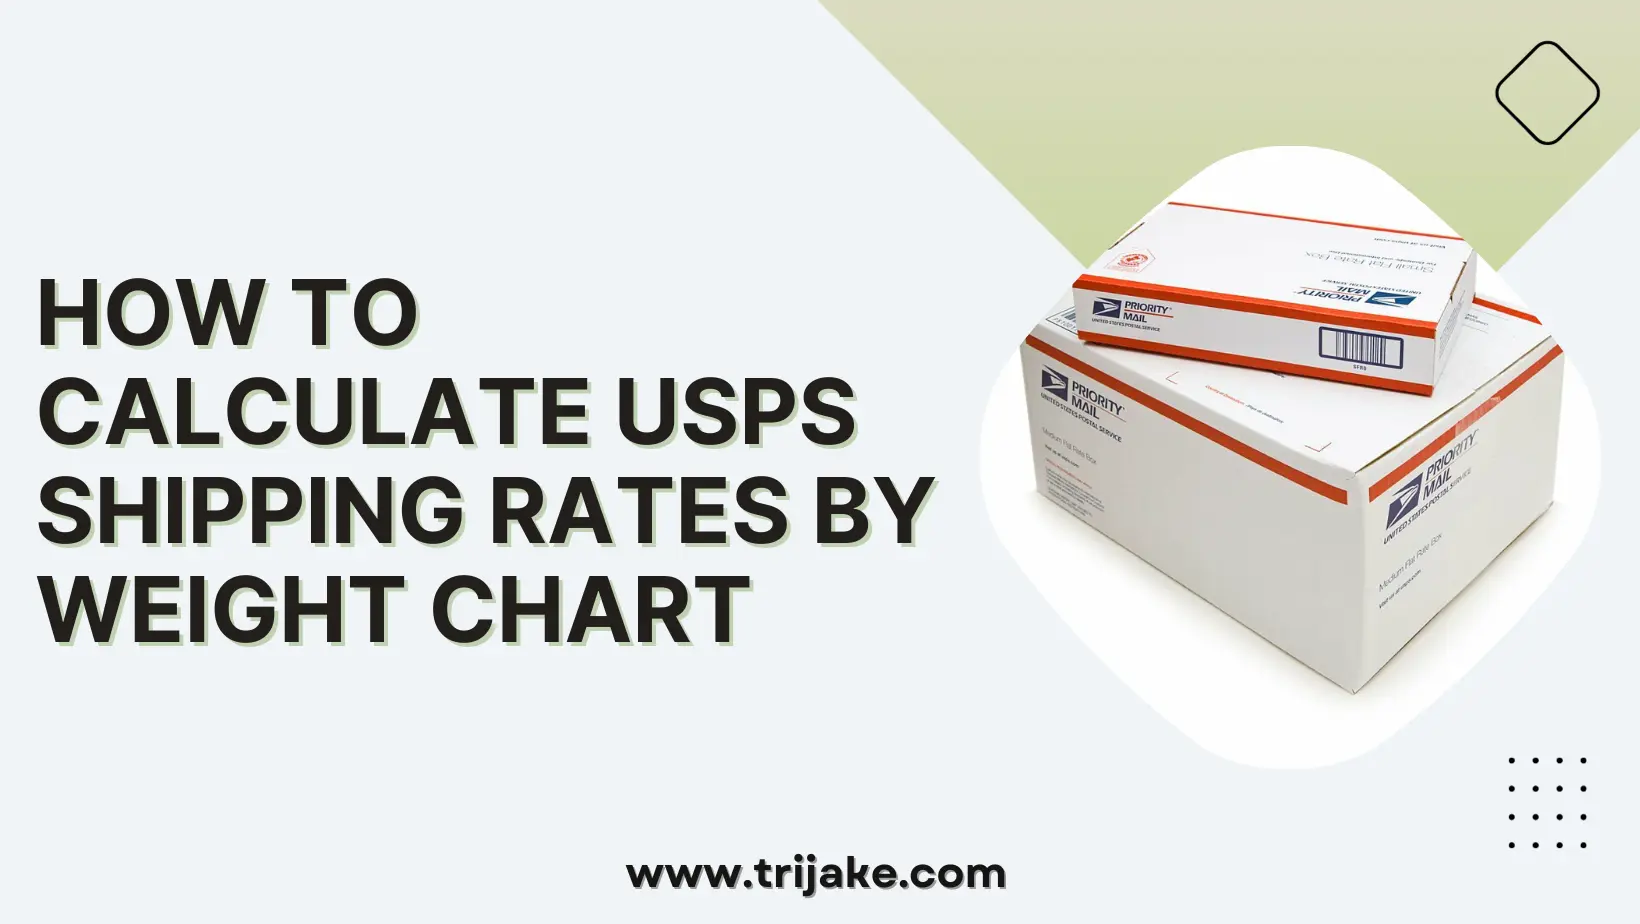 USPS Shipping Rates by Weight Chart